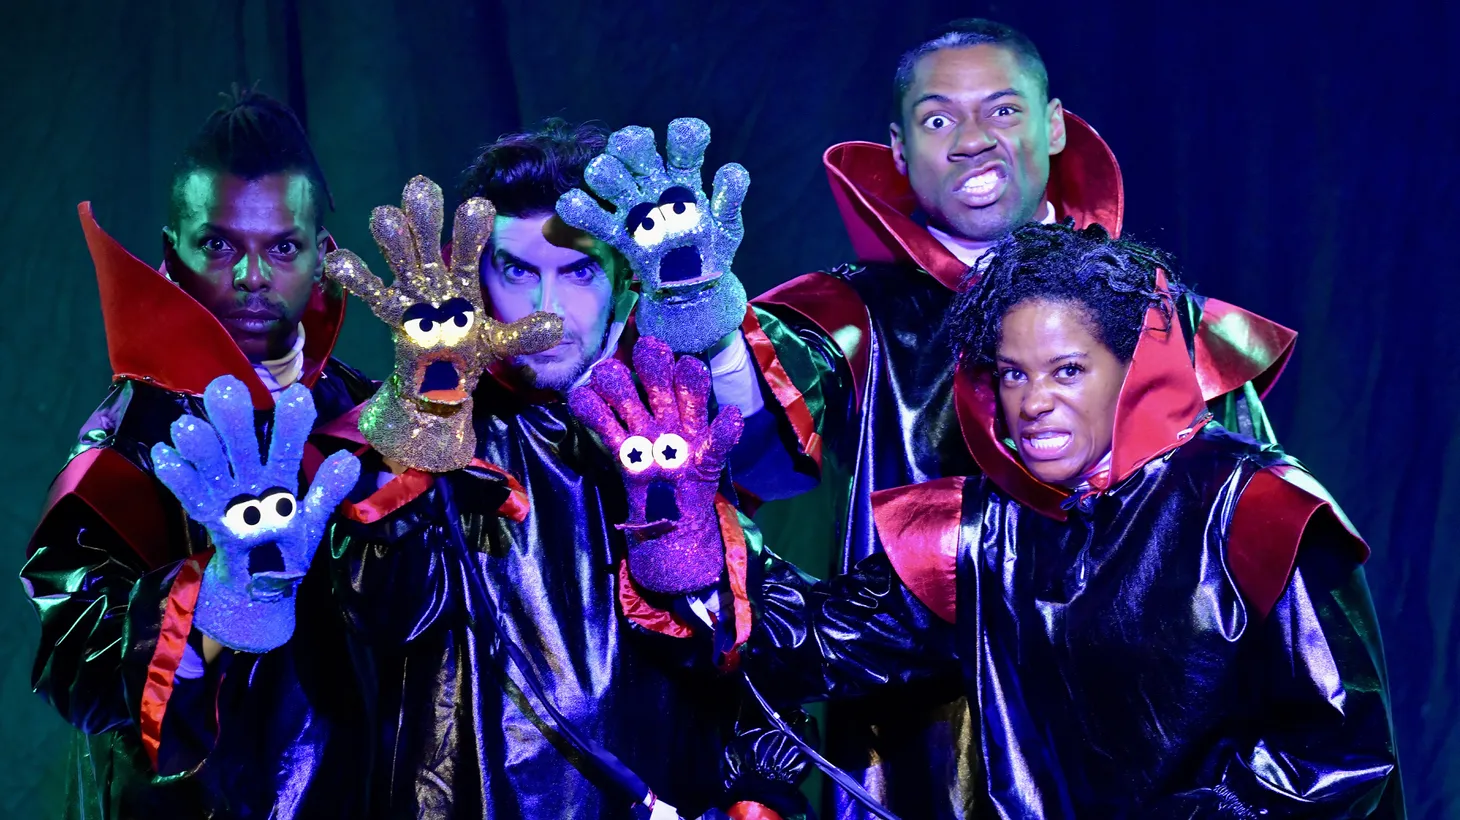 In “For the Love of a Glove,” glove-shaped aliens from the planet Bazalaam are responsible for giving the Jackson 5 their musical talent.